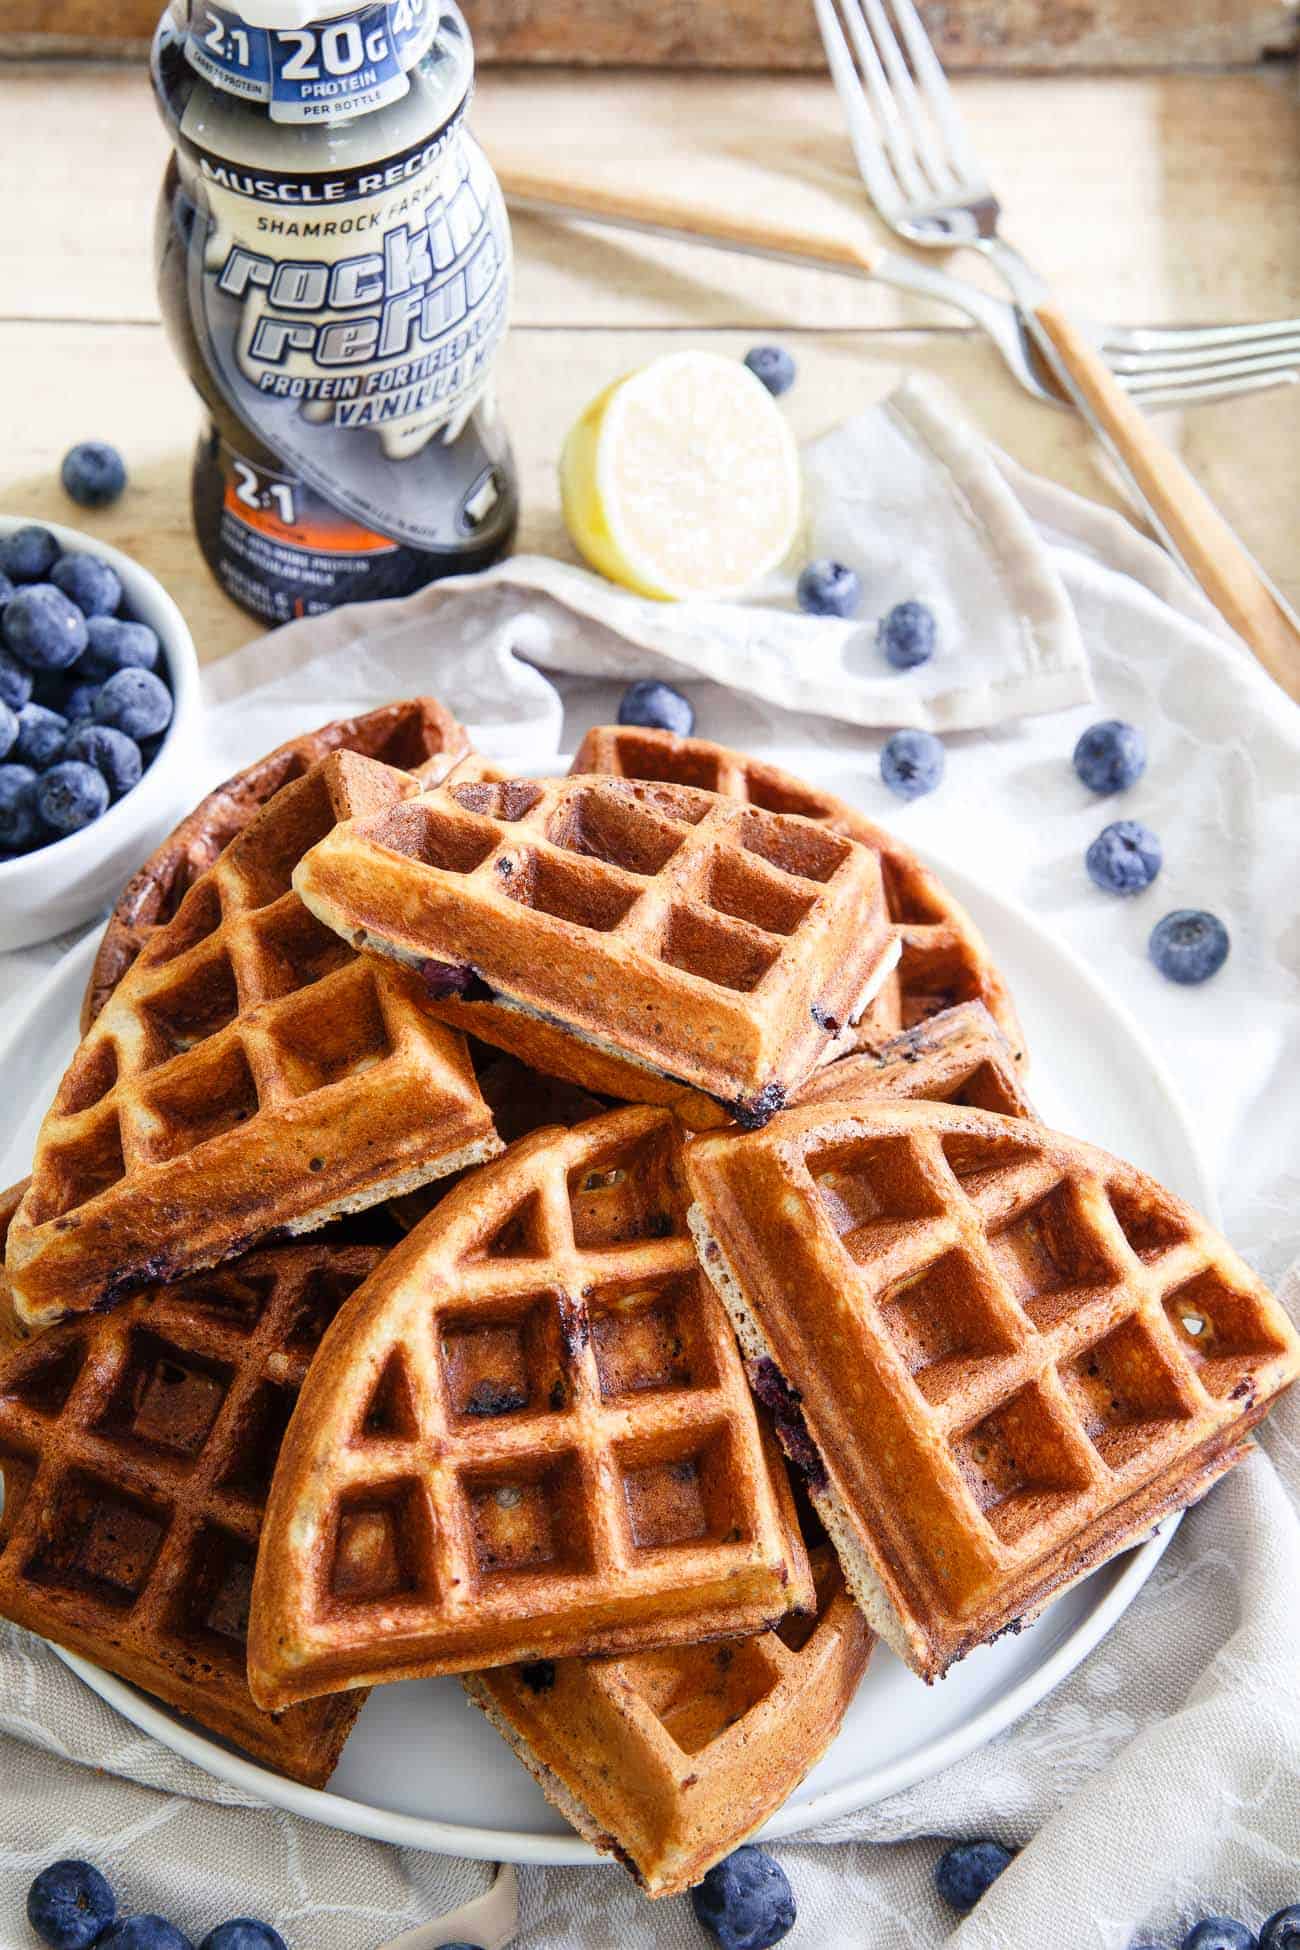 Waffle bites packed with protein, lemon flavor and blueberries can either be enjoyed for breakfast or eaten as a snack, they're delicious either way.